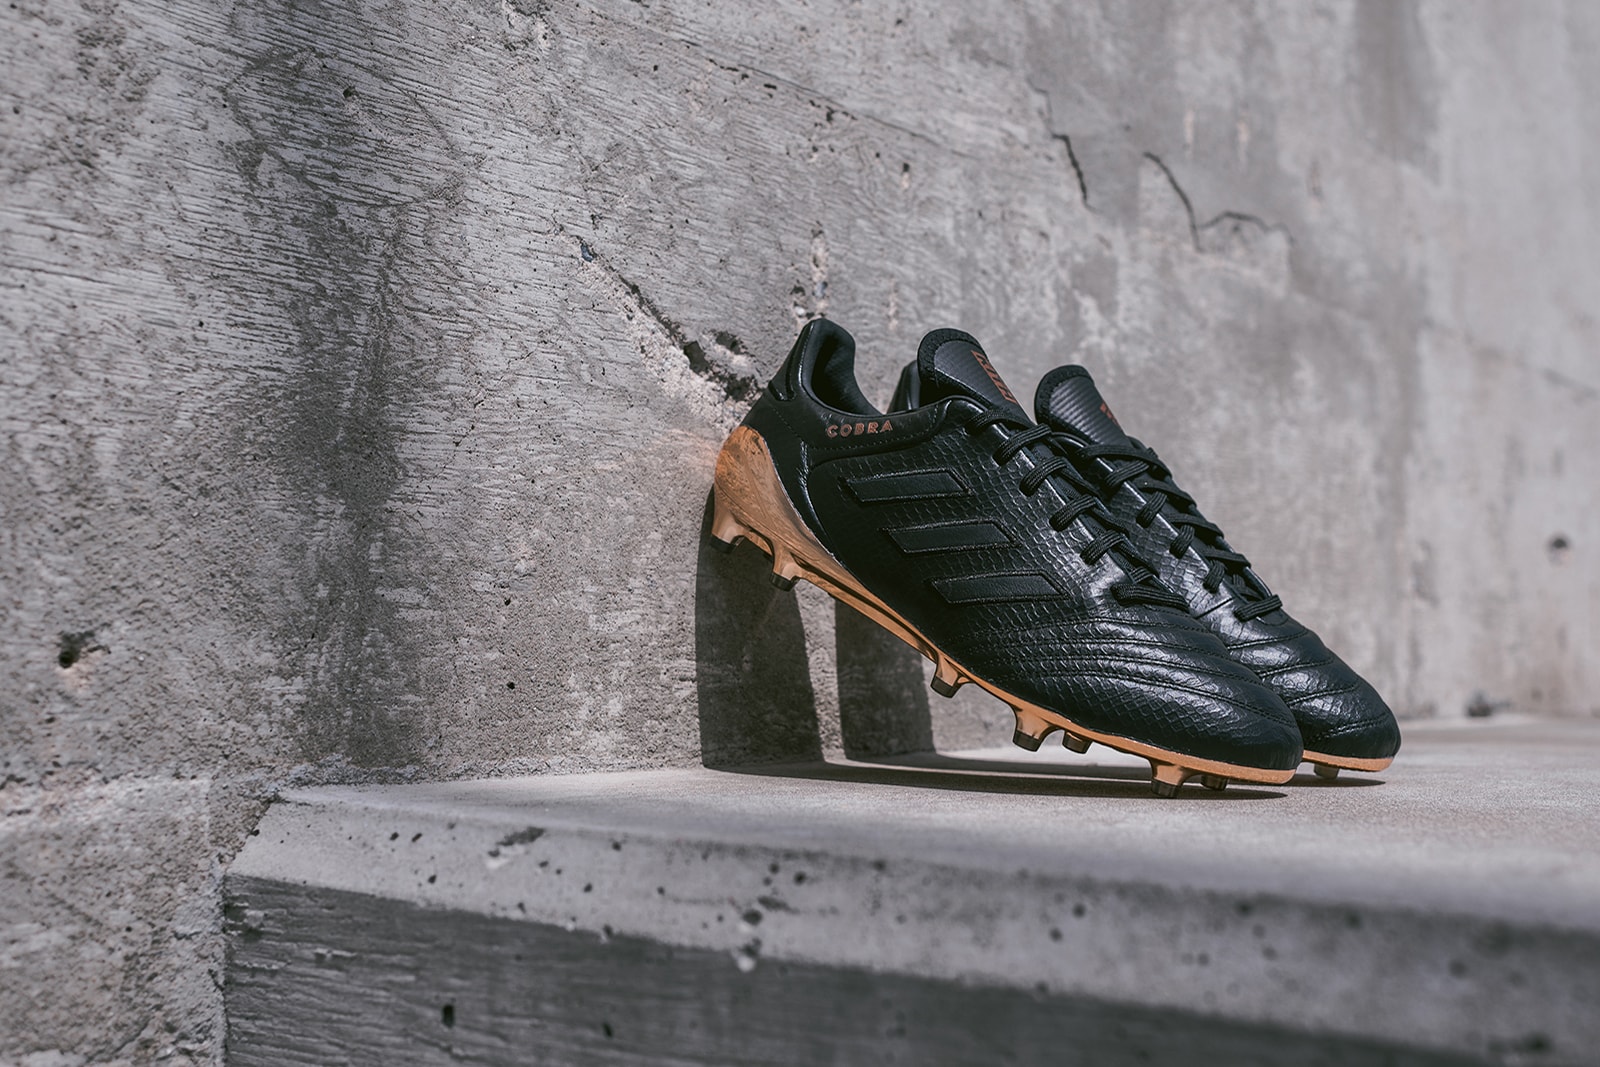 KITH x adidas Soccer Footwear Collection Closer Look